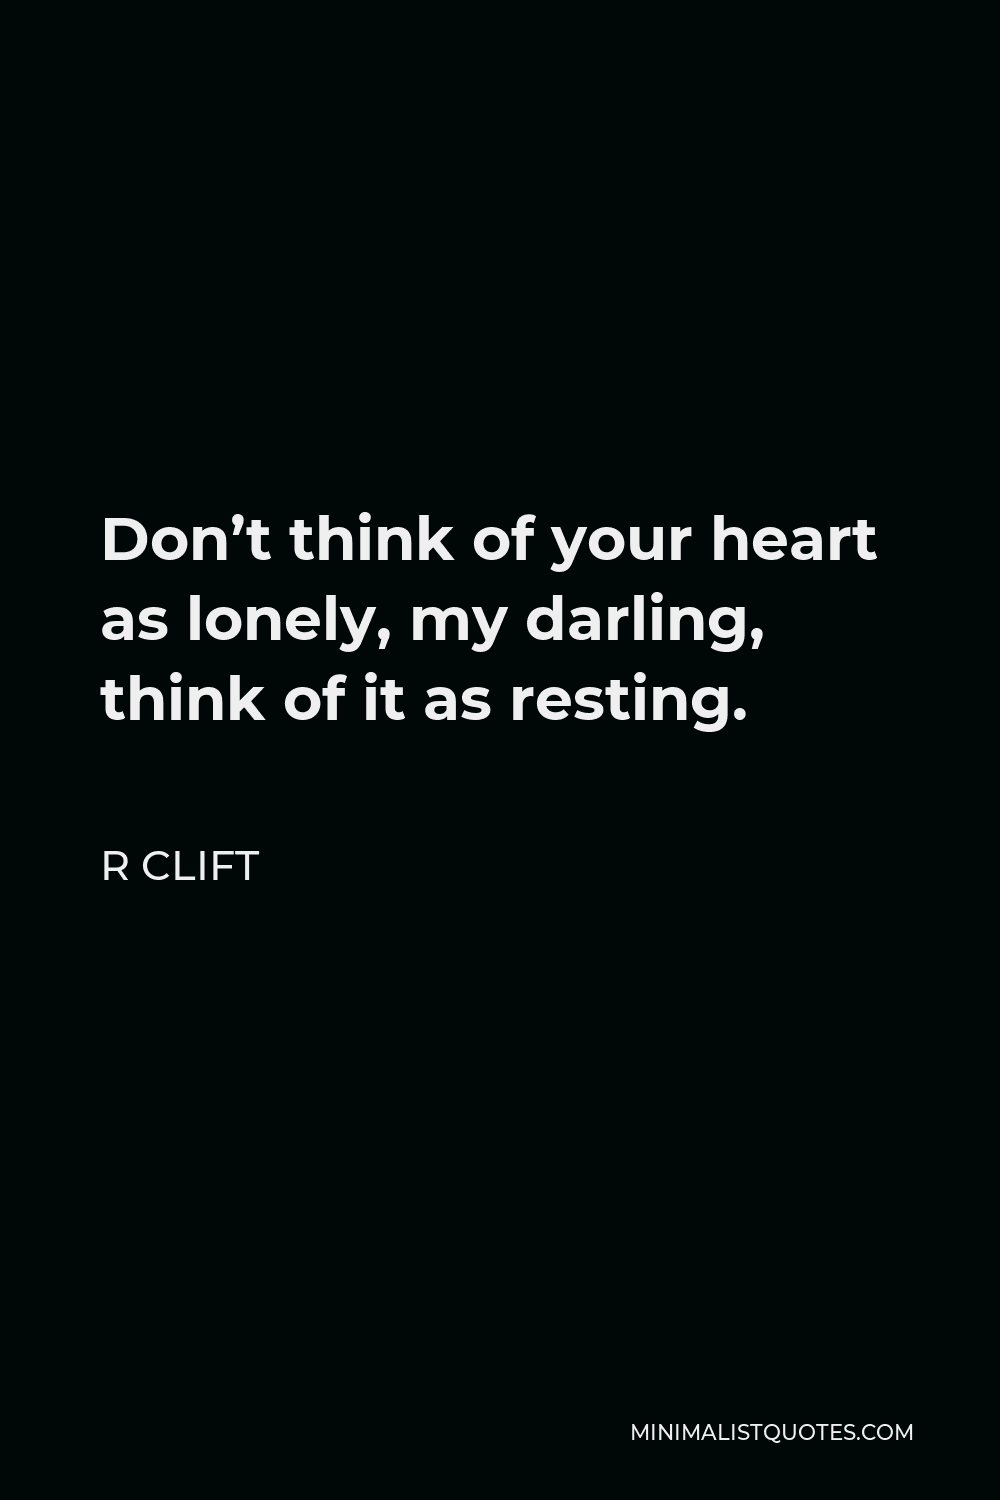 R Clift Quote - Don’t think of your heart as lonely, my darling, think of it as resting.